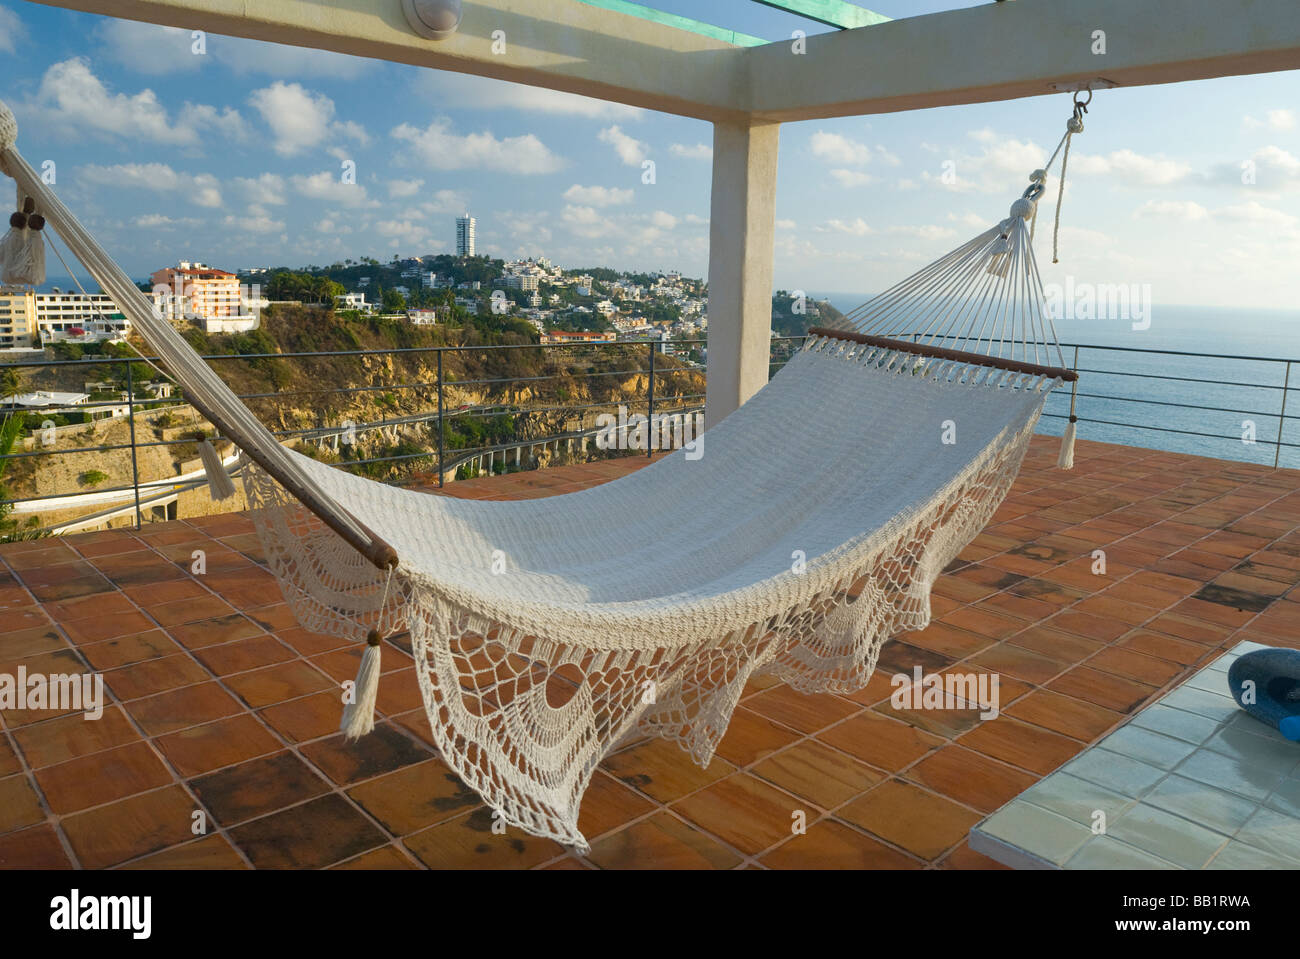 Hammock on rooftop in Acapulco Mexico Stock Photo